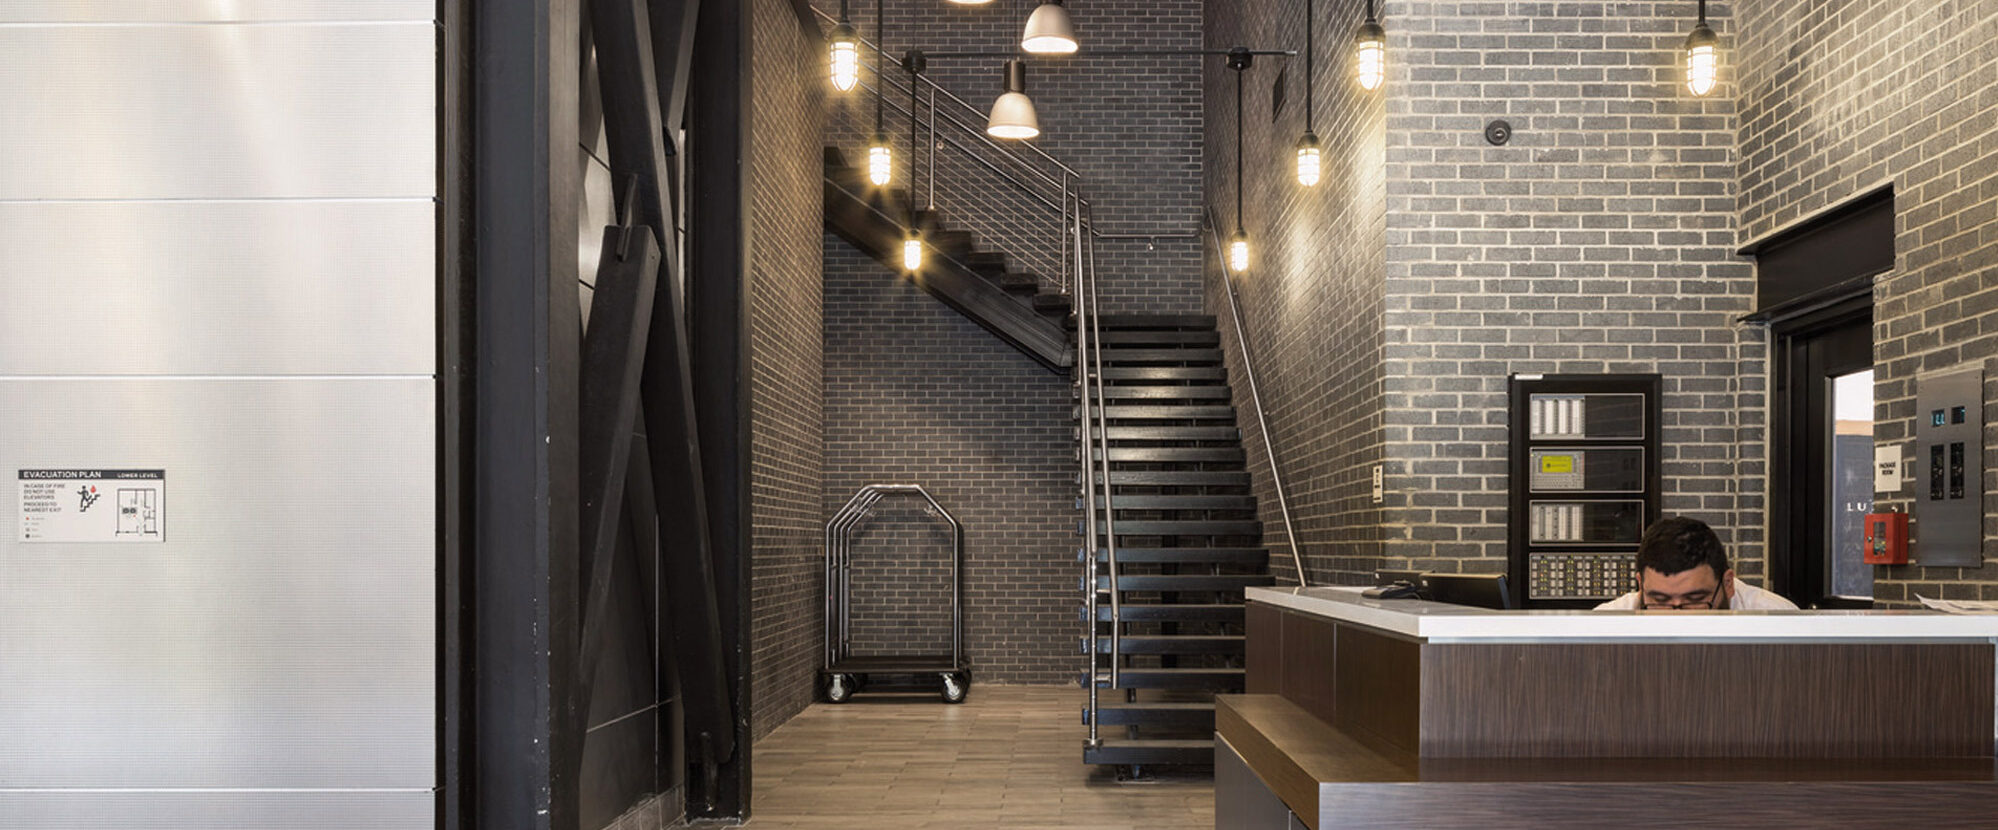 Modern industrial-style lobby featuring exposed black ceiling beams, brick walls, and pendant lighting. A sleek reception desk anchors the space while a metal staircase with cable railings leads upwards, complementing the dark wood flooring.